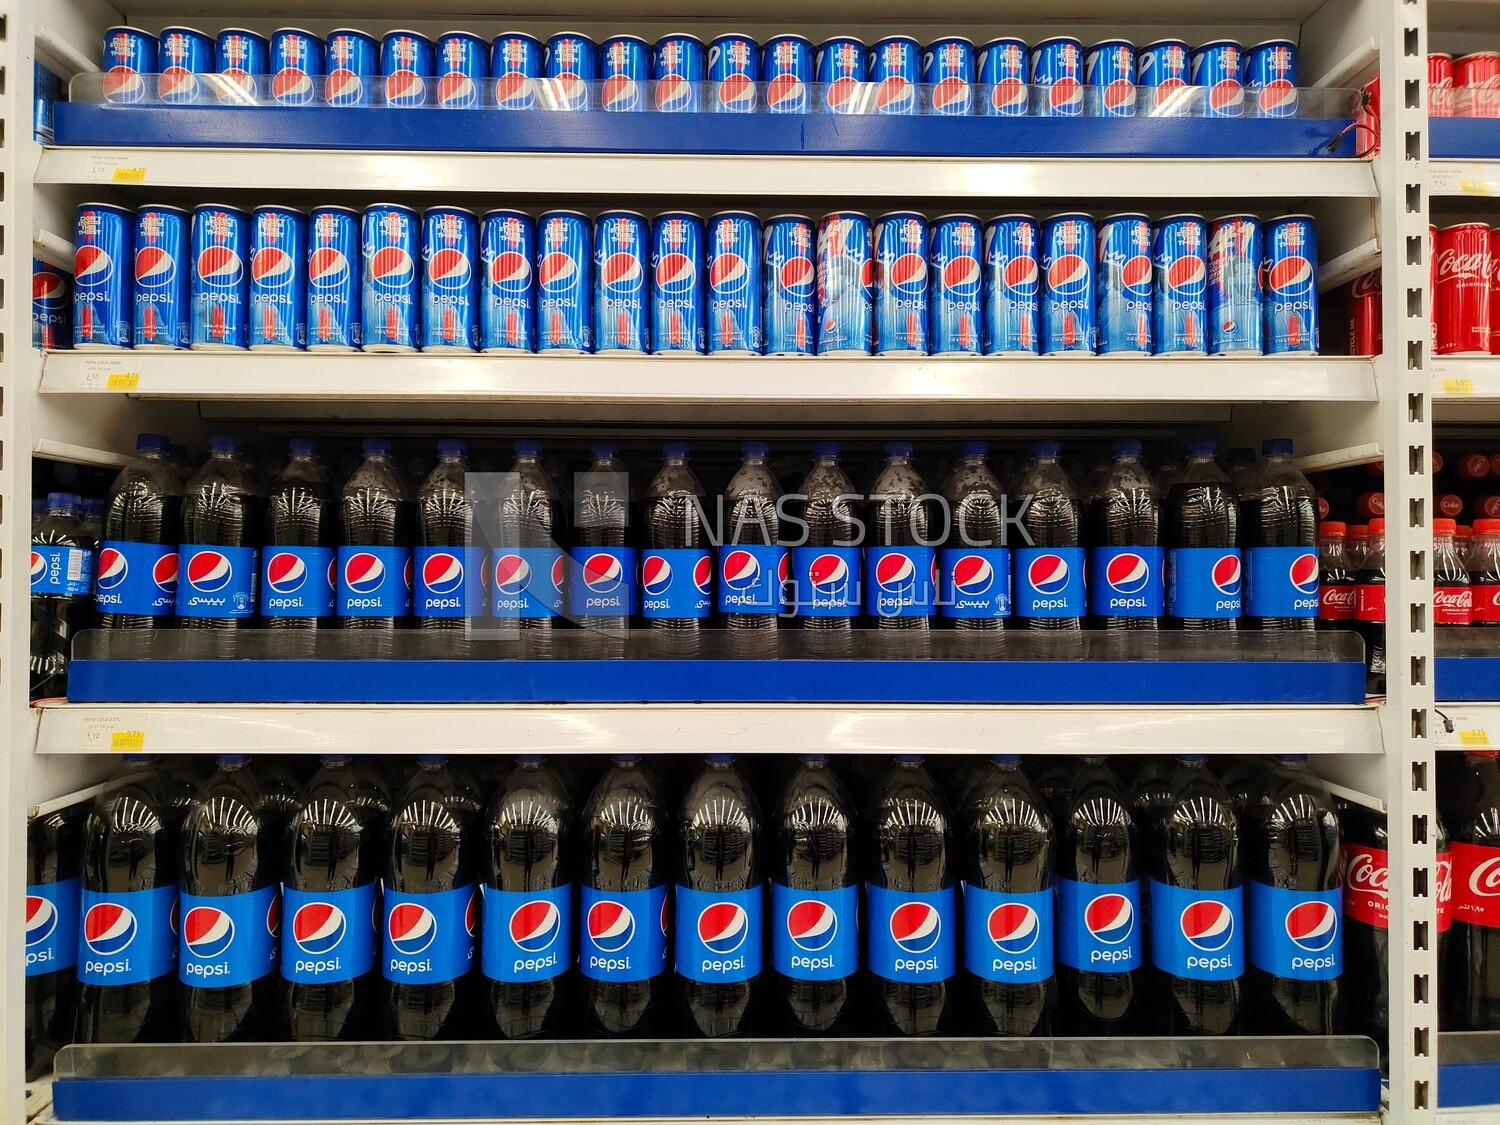 Shelves stacked with types of pepsi bottels